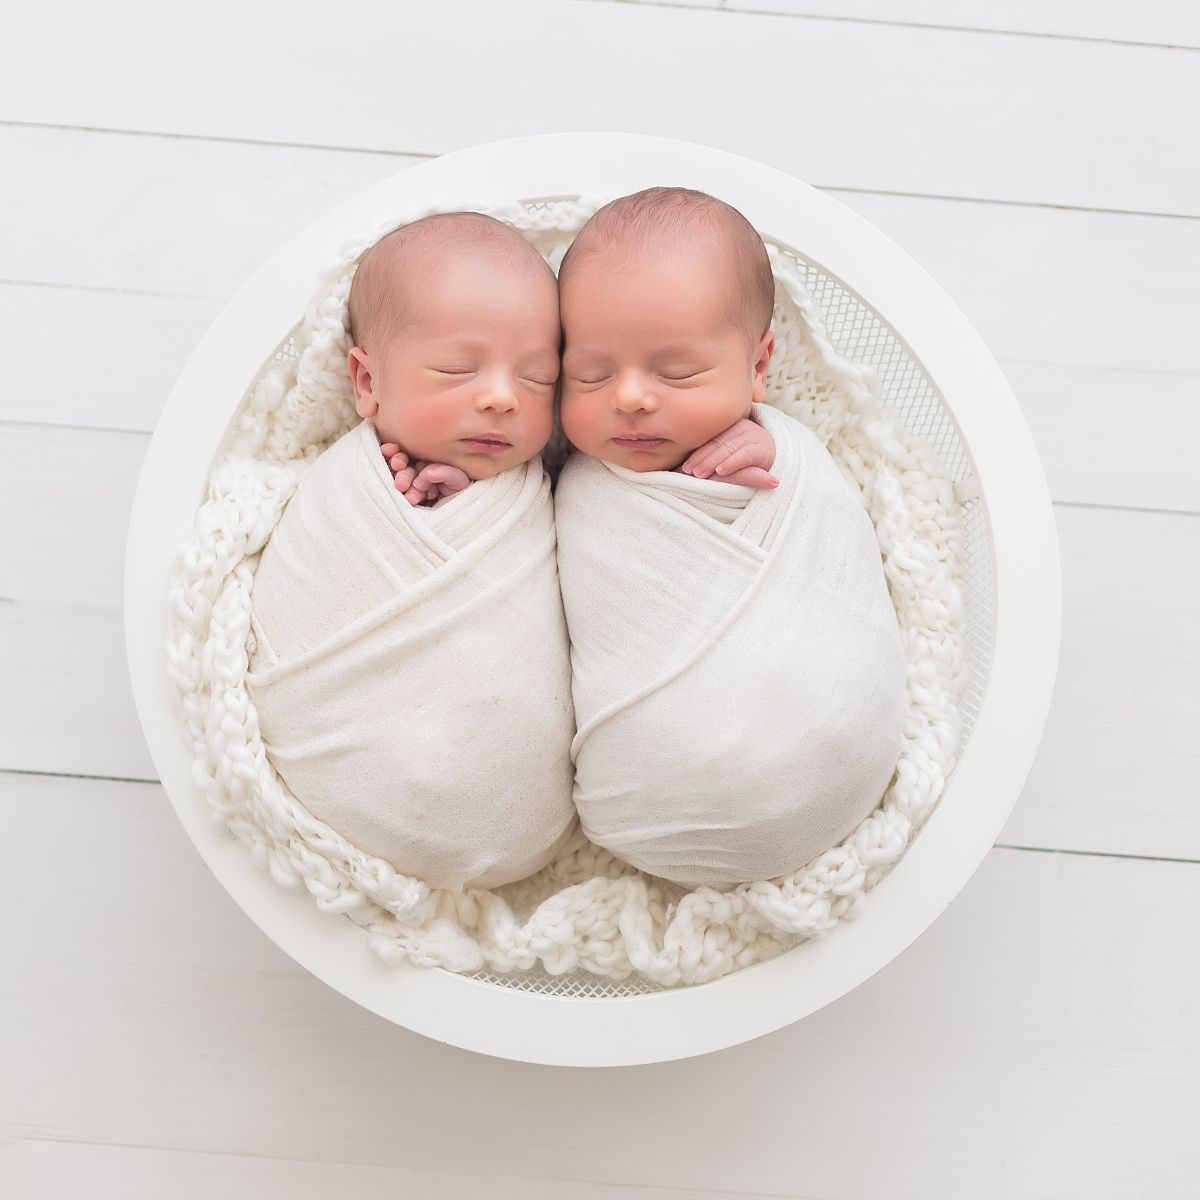 dream about having twins